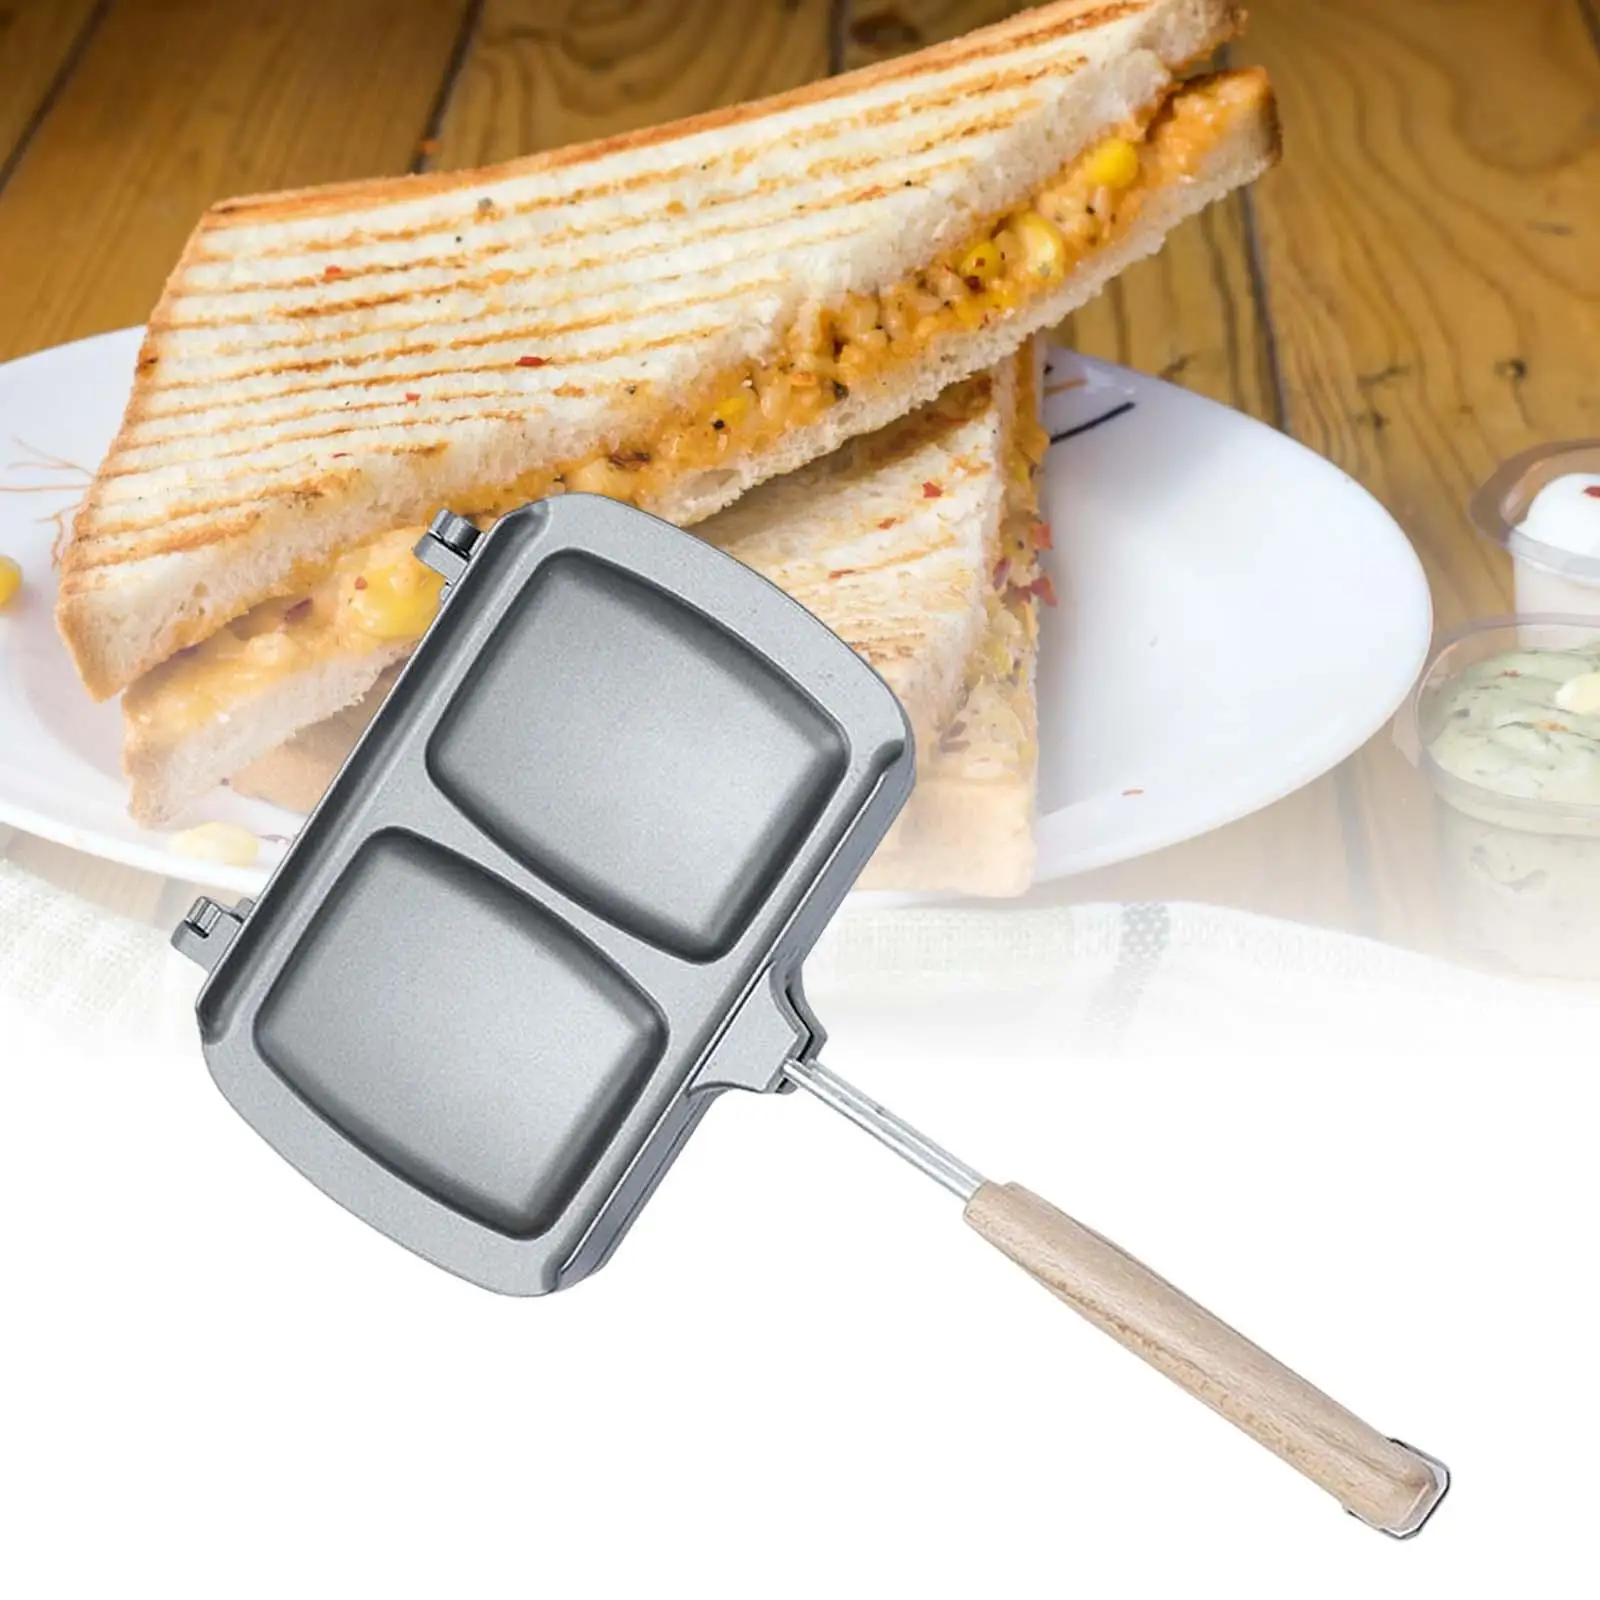 Bread Toast Maker Non Stick Grill Pan Double Sided Heating Frying Egg Ham Sandwiches Maker for Induction Cooker Stove Top four cup egg pan frying egg cooker